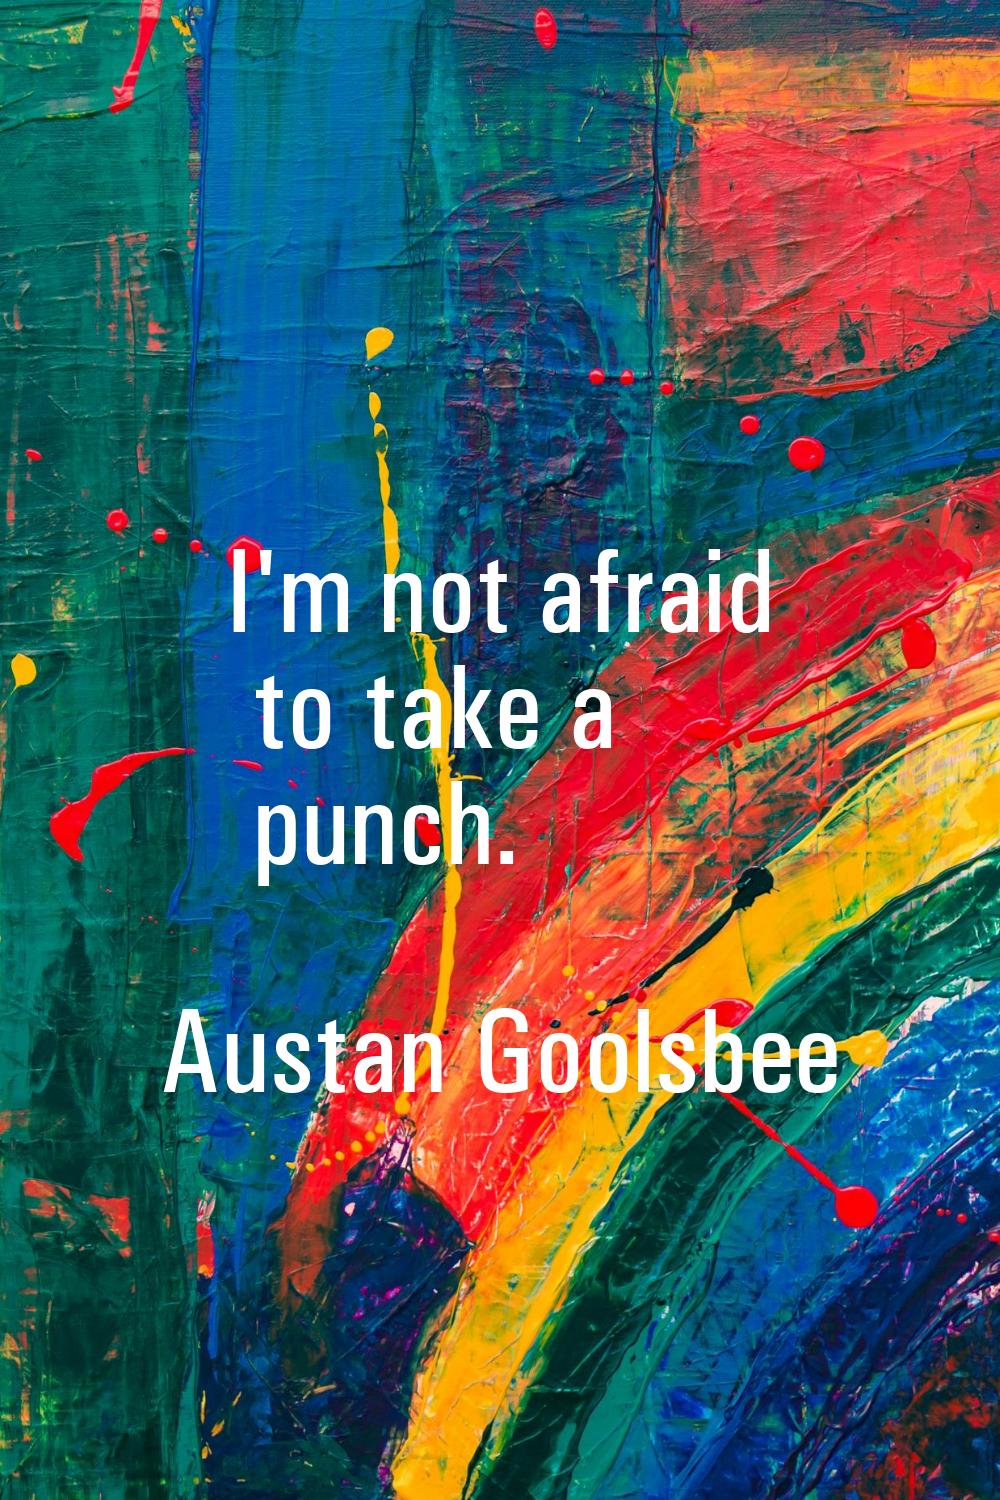 I'm not afraid to take a punch.